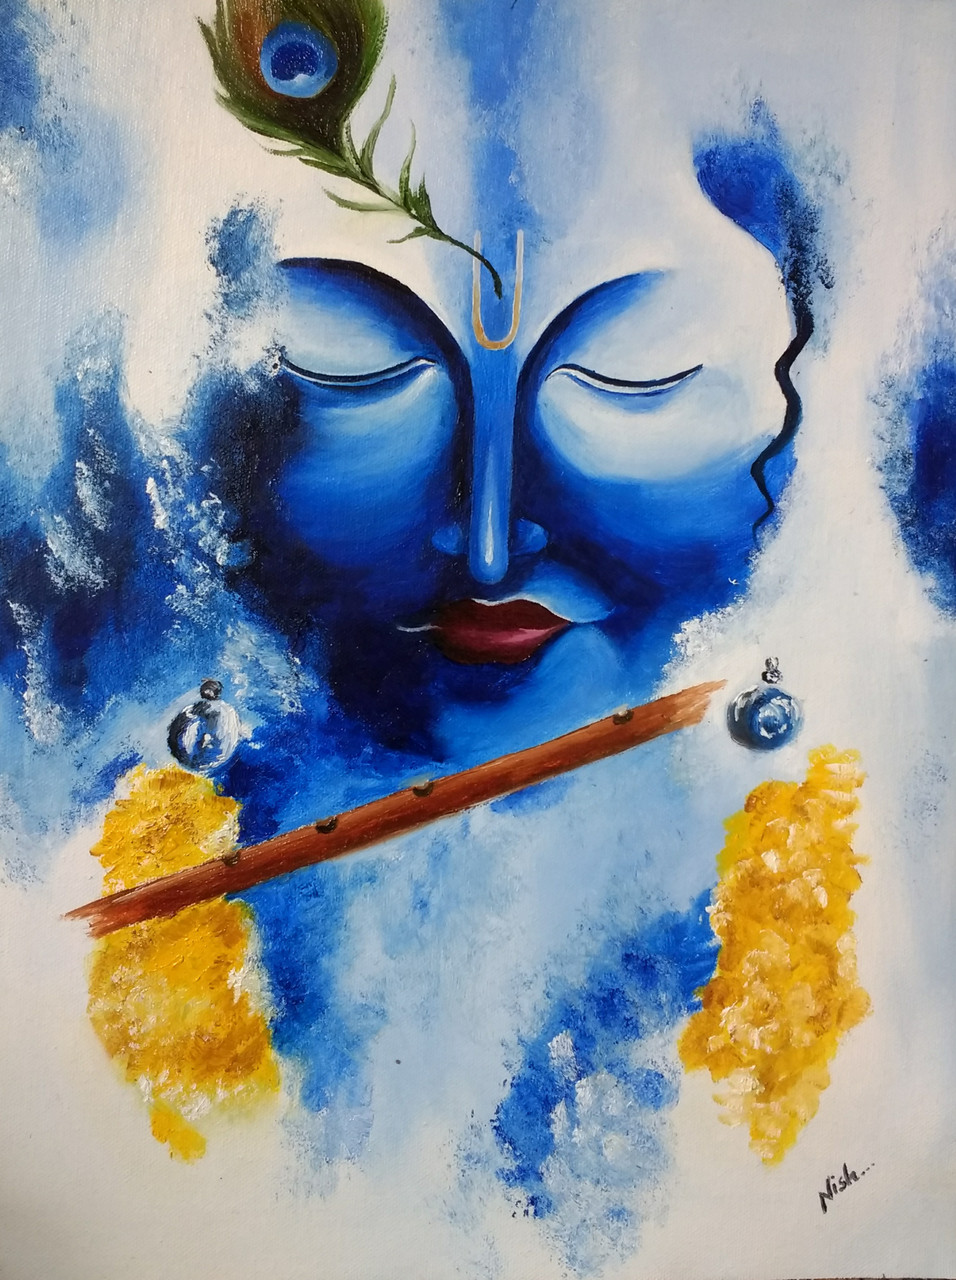 Incredible 4K Collection of Over 999 Krishna Paintings